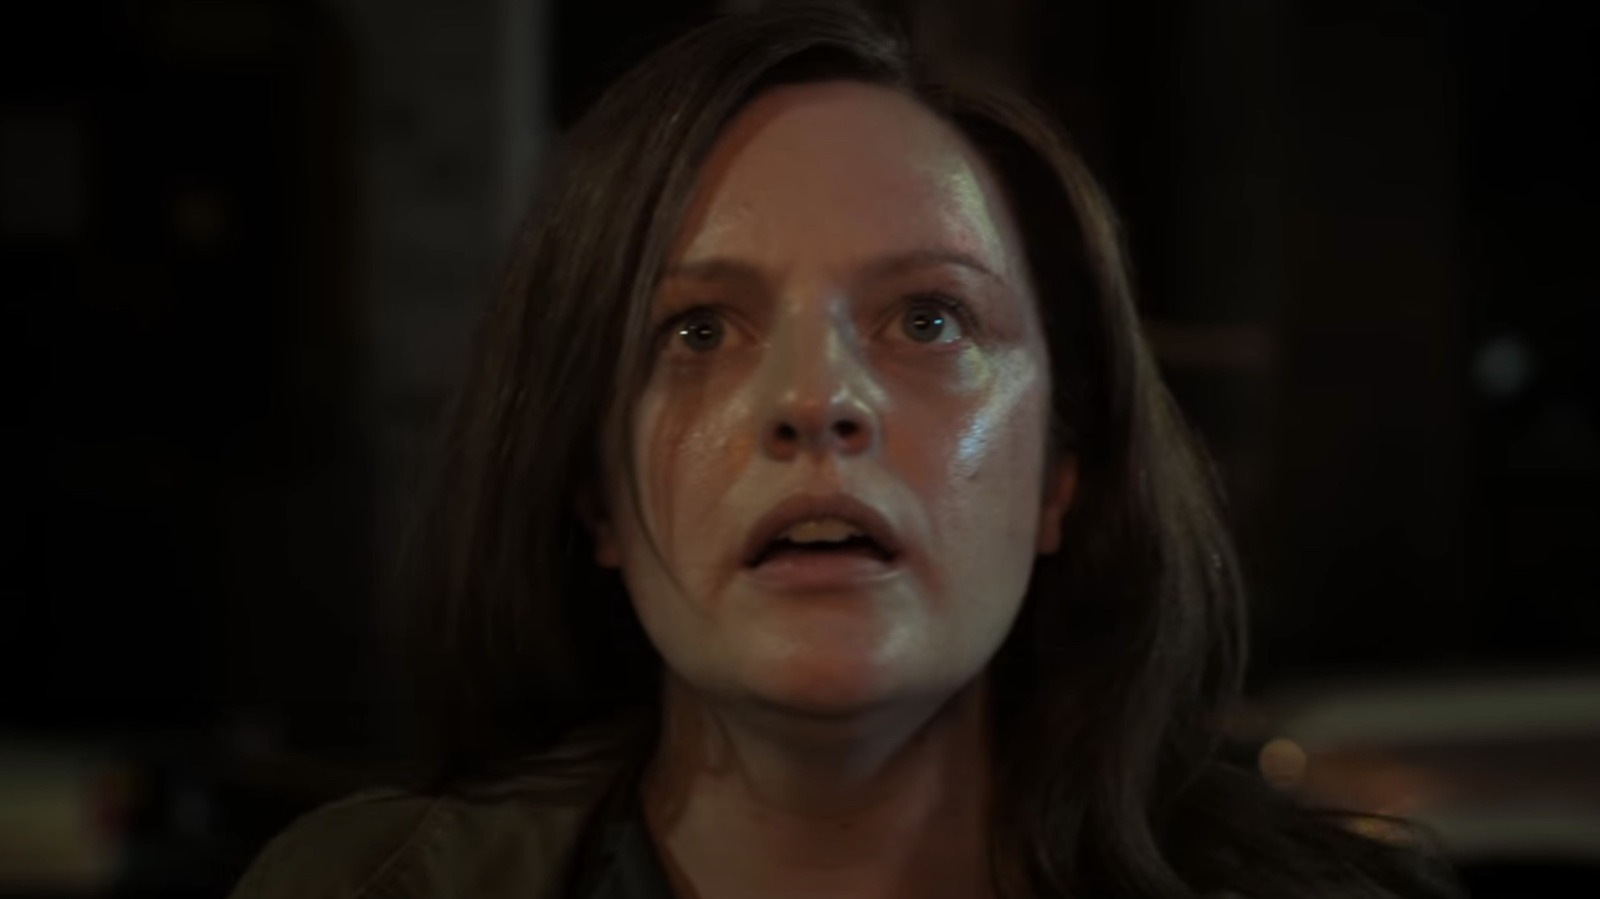 #Elisabeth Moss Is Unstuck In Time In This Creepy, Mystifying Series